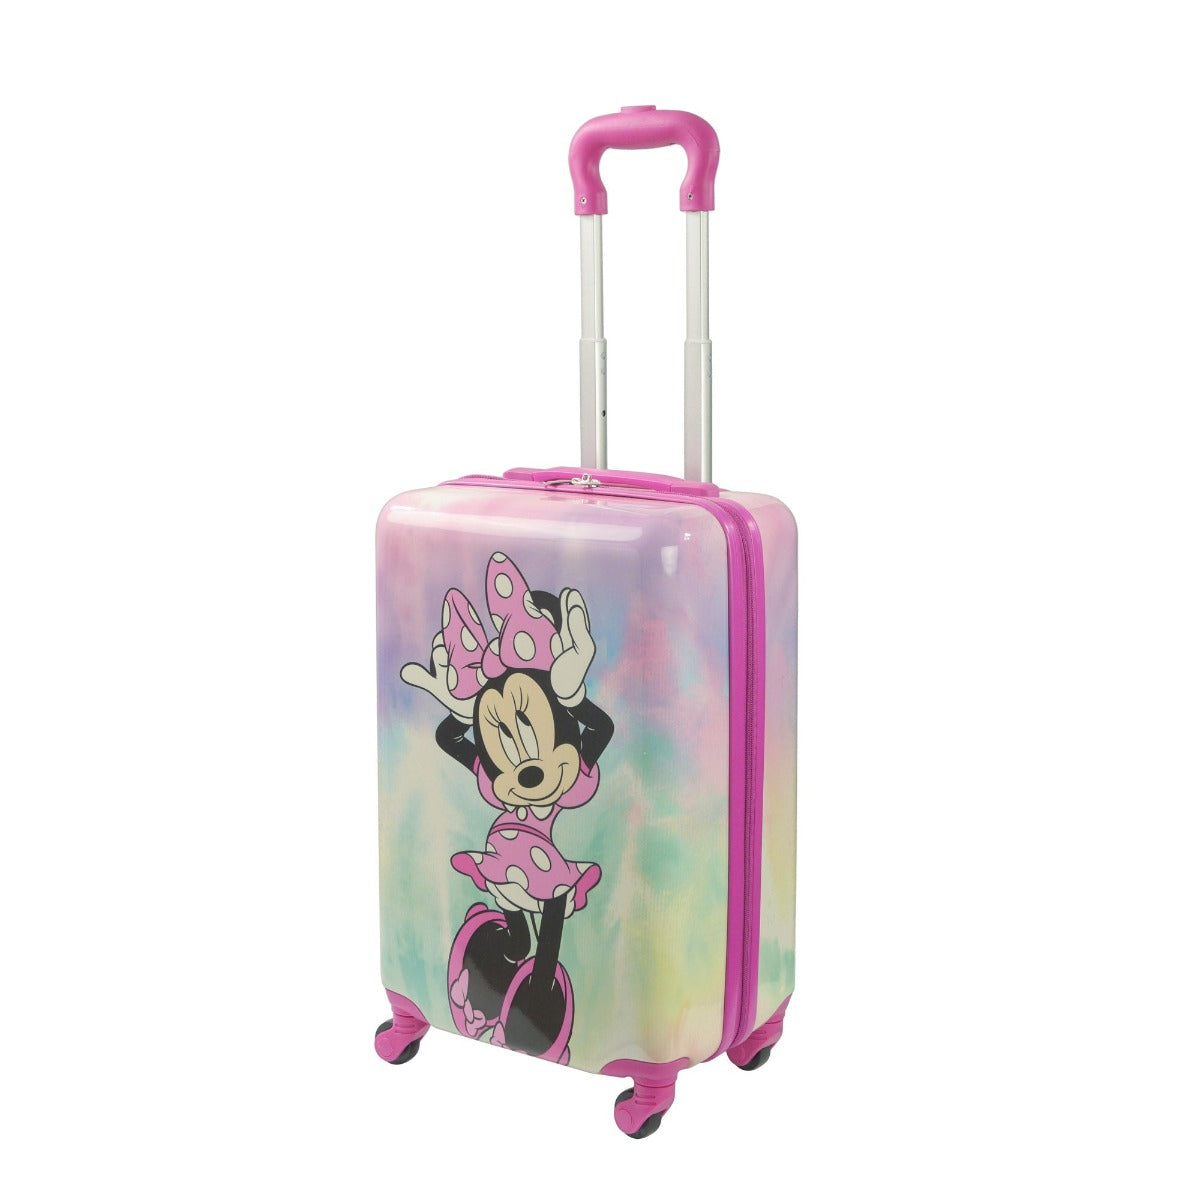 Disney Minnie Mouse 21" hardside spinner suitcase - best carry on luggage for kids